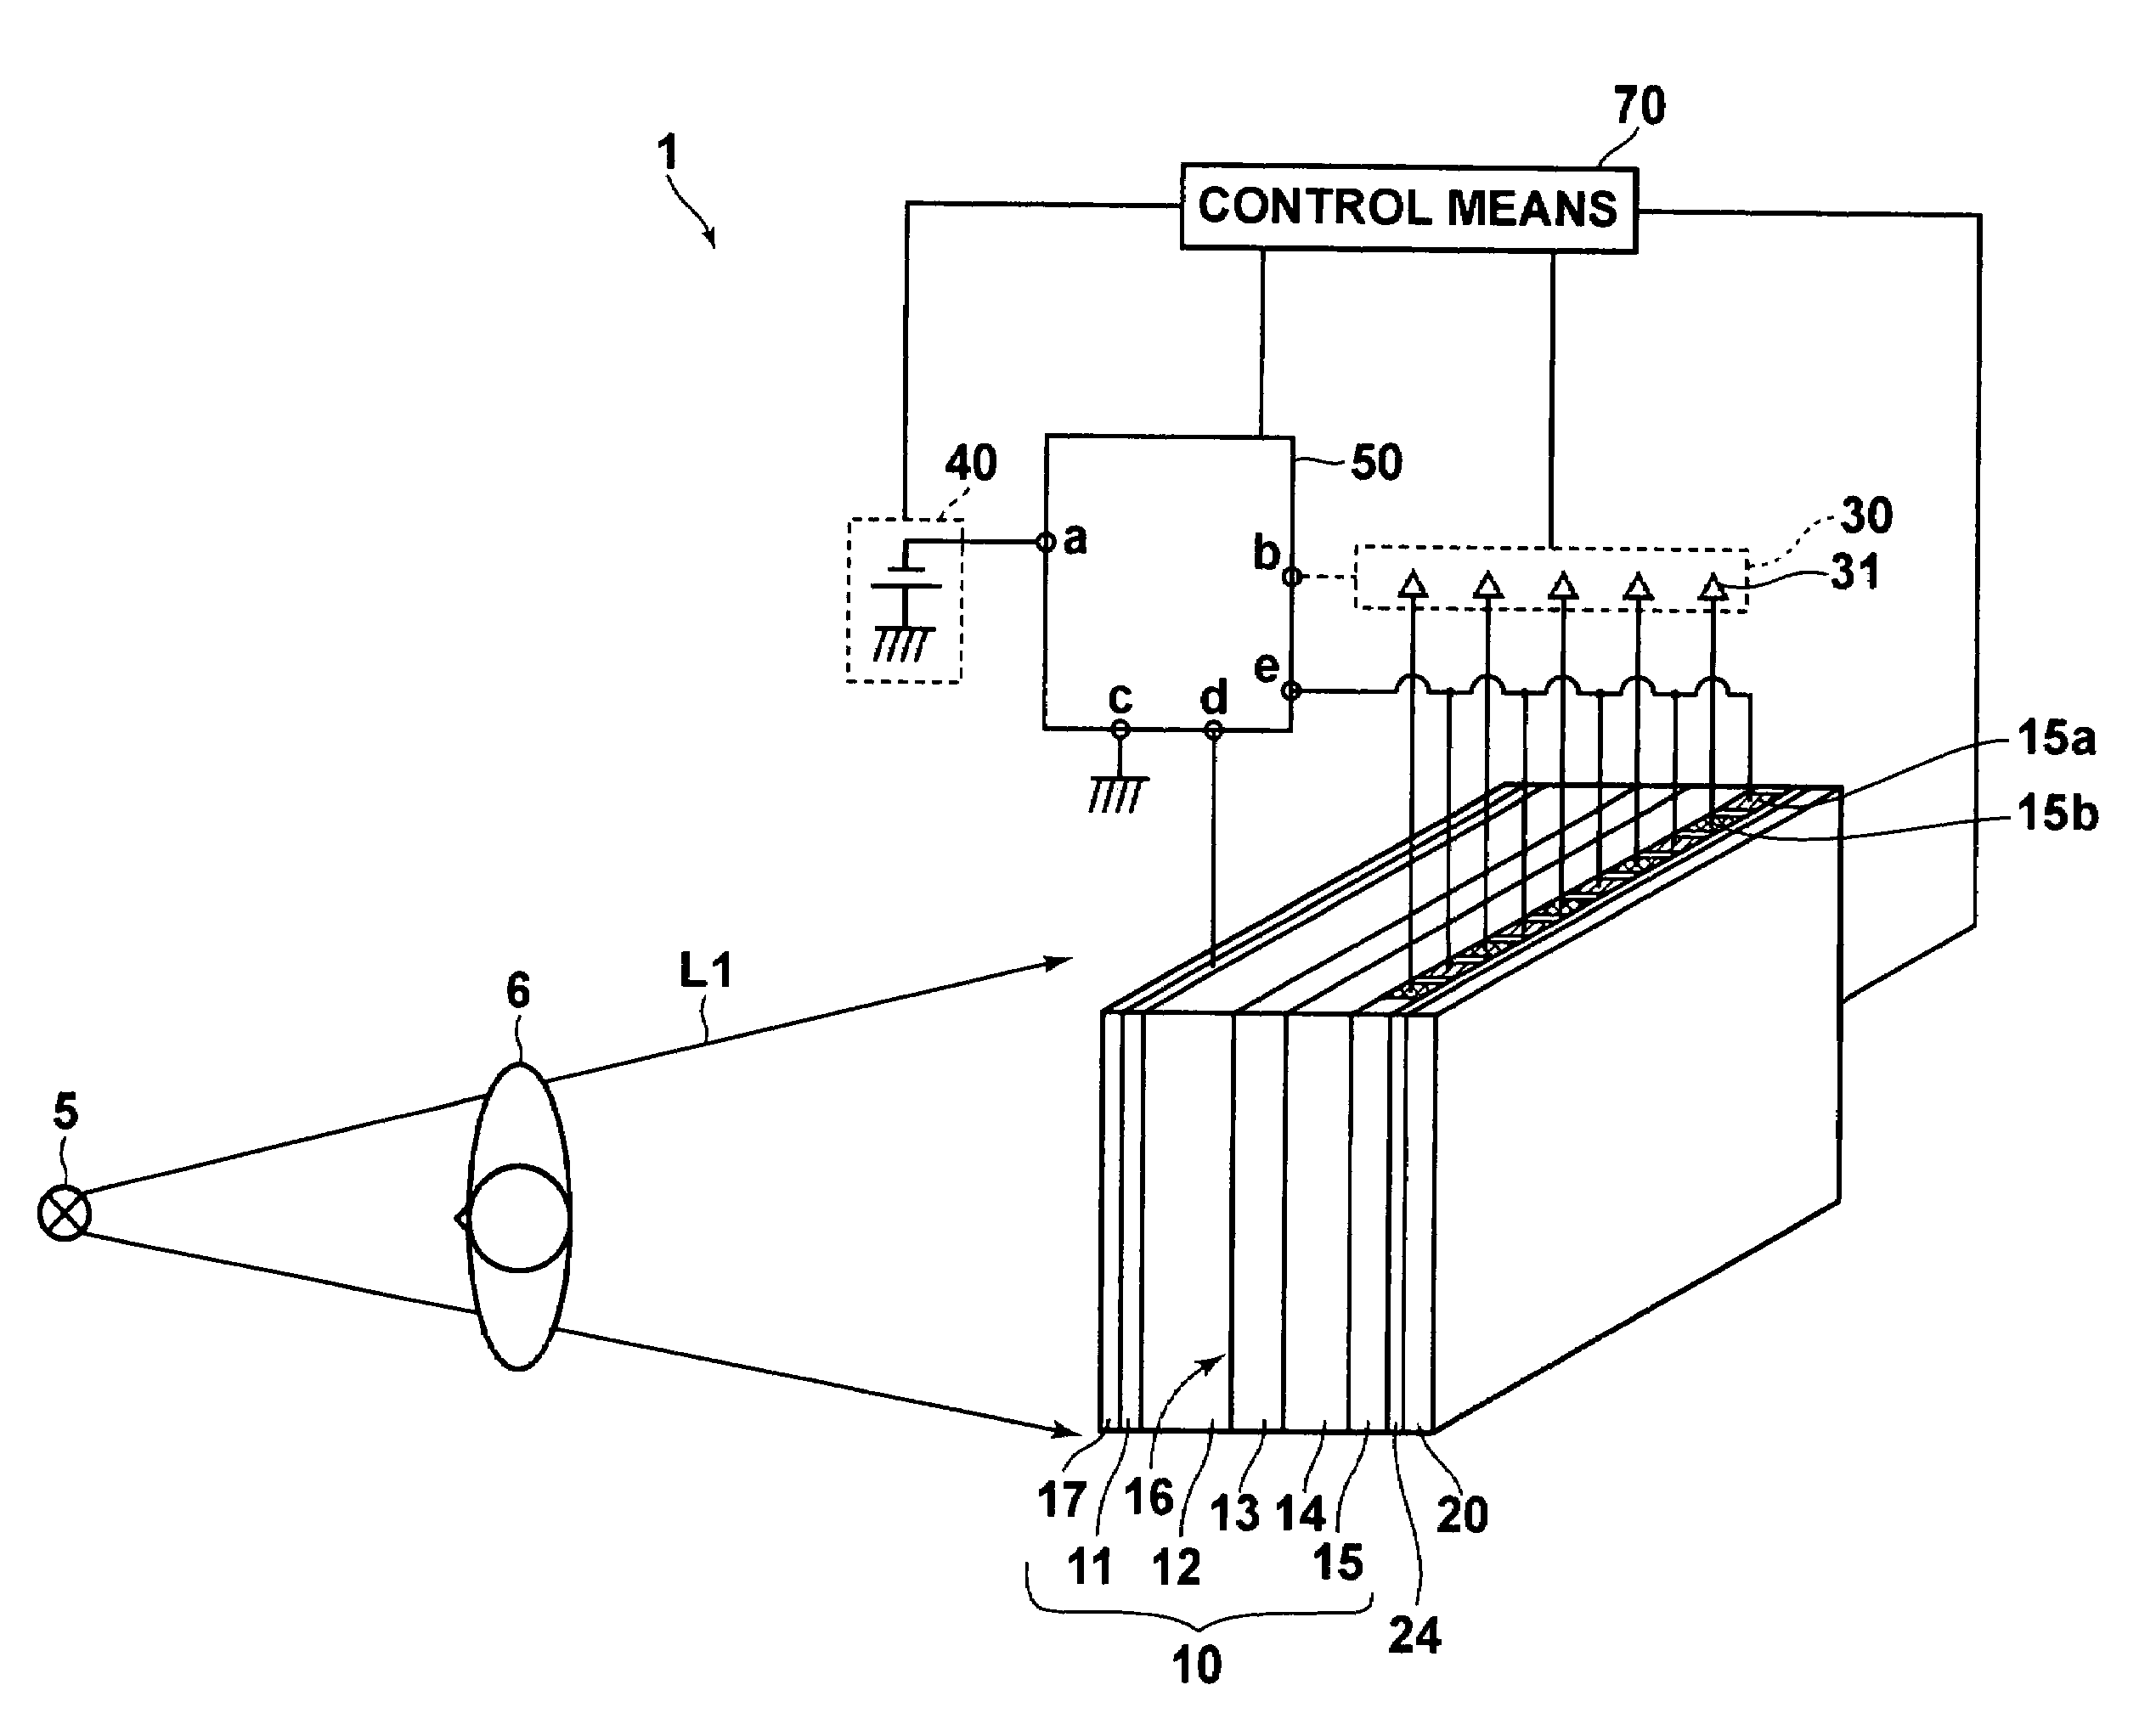 Radiation image detection method and system